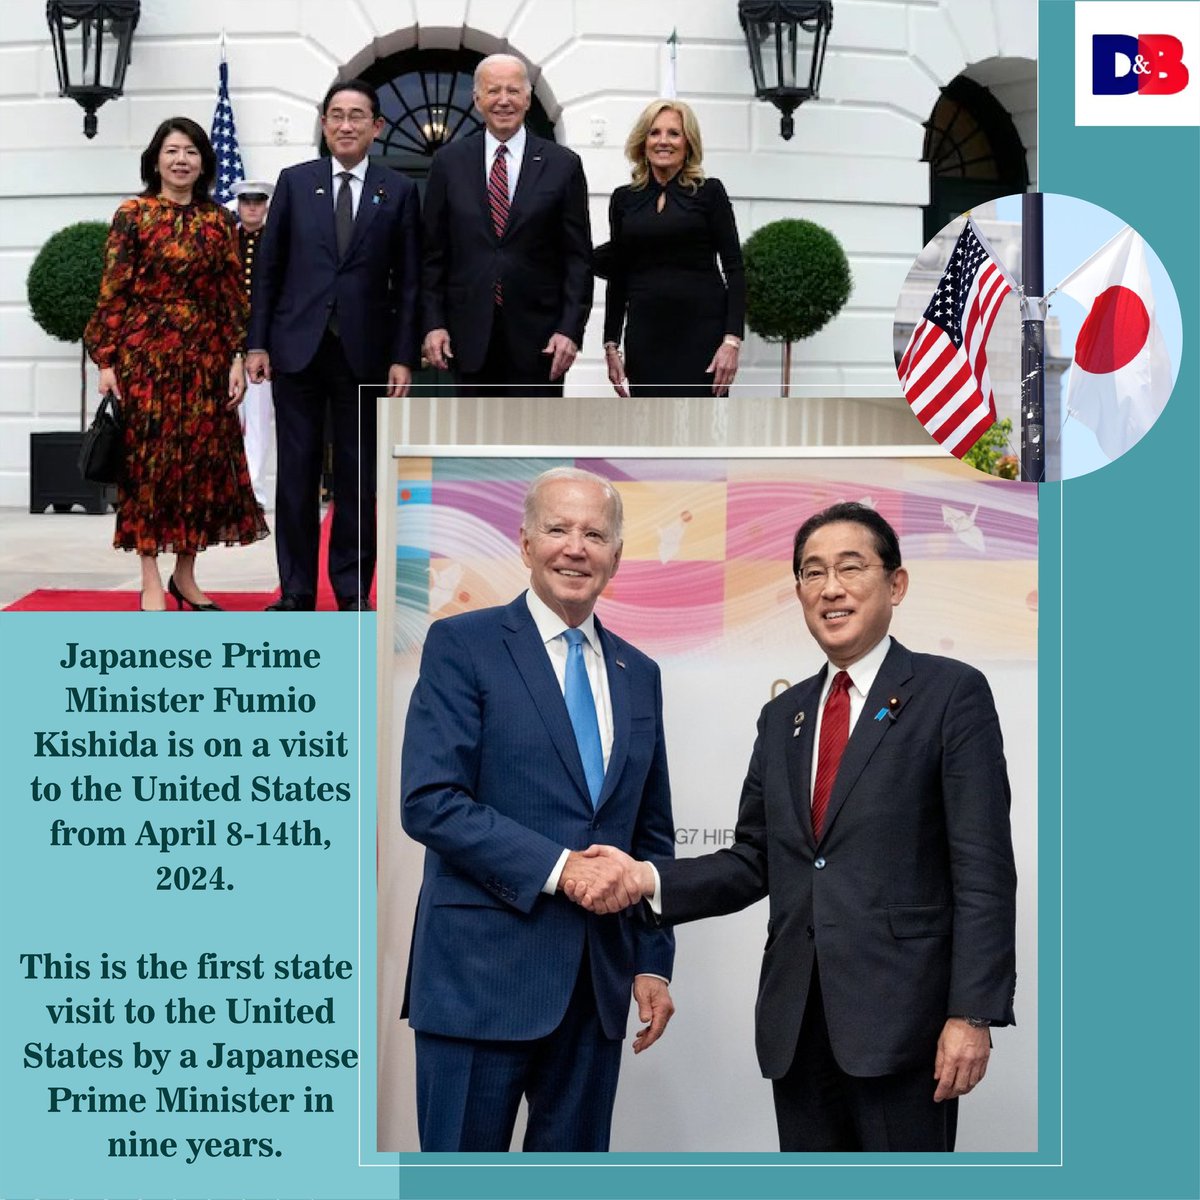 The visit is aimed at bolstering bilateral alliance b/w #Japan and the #US with the aim of a deeper #defense integration and #economic partnership🇯🇵🇺🇸

#japan
#usa
#globalpolitics
#cooperation 
#collaboration 
#diplomacy